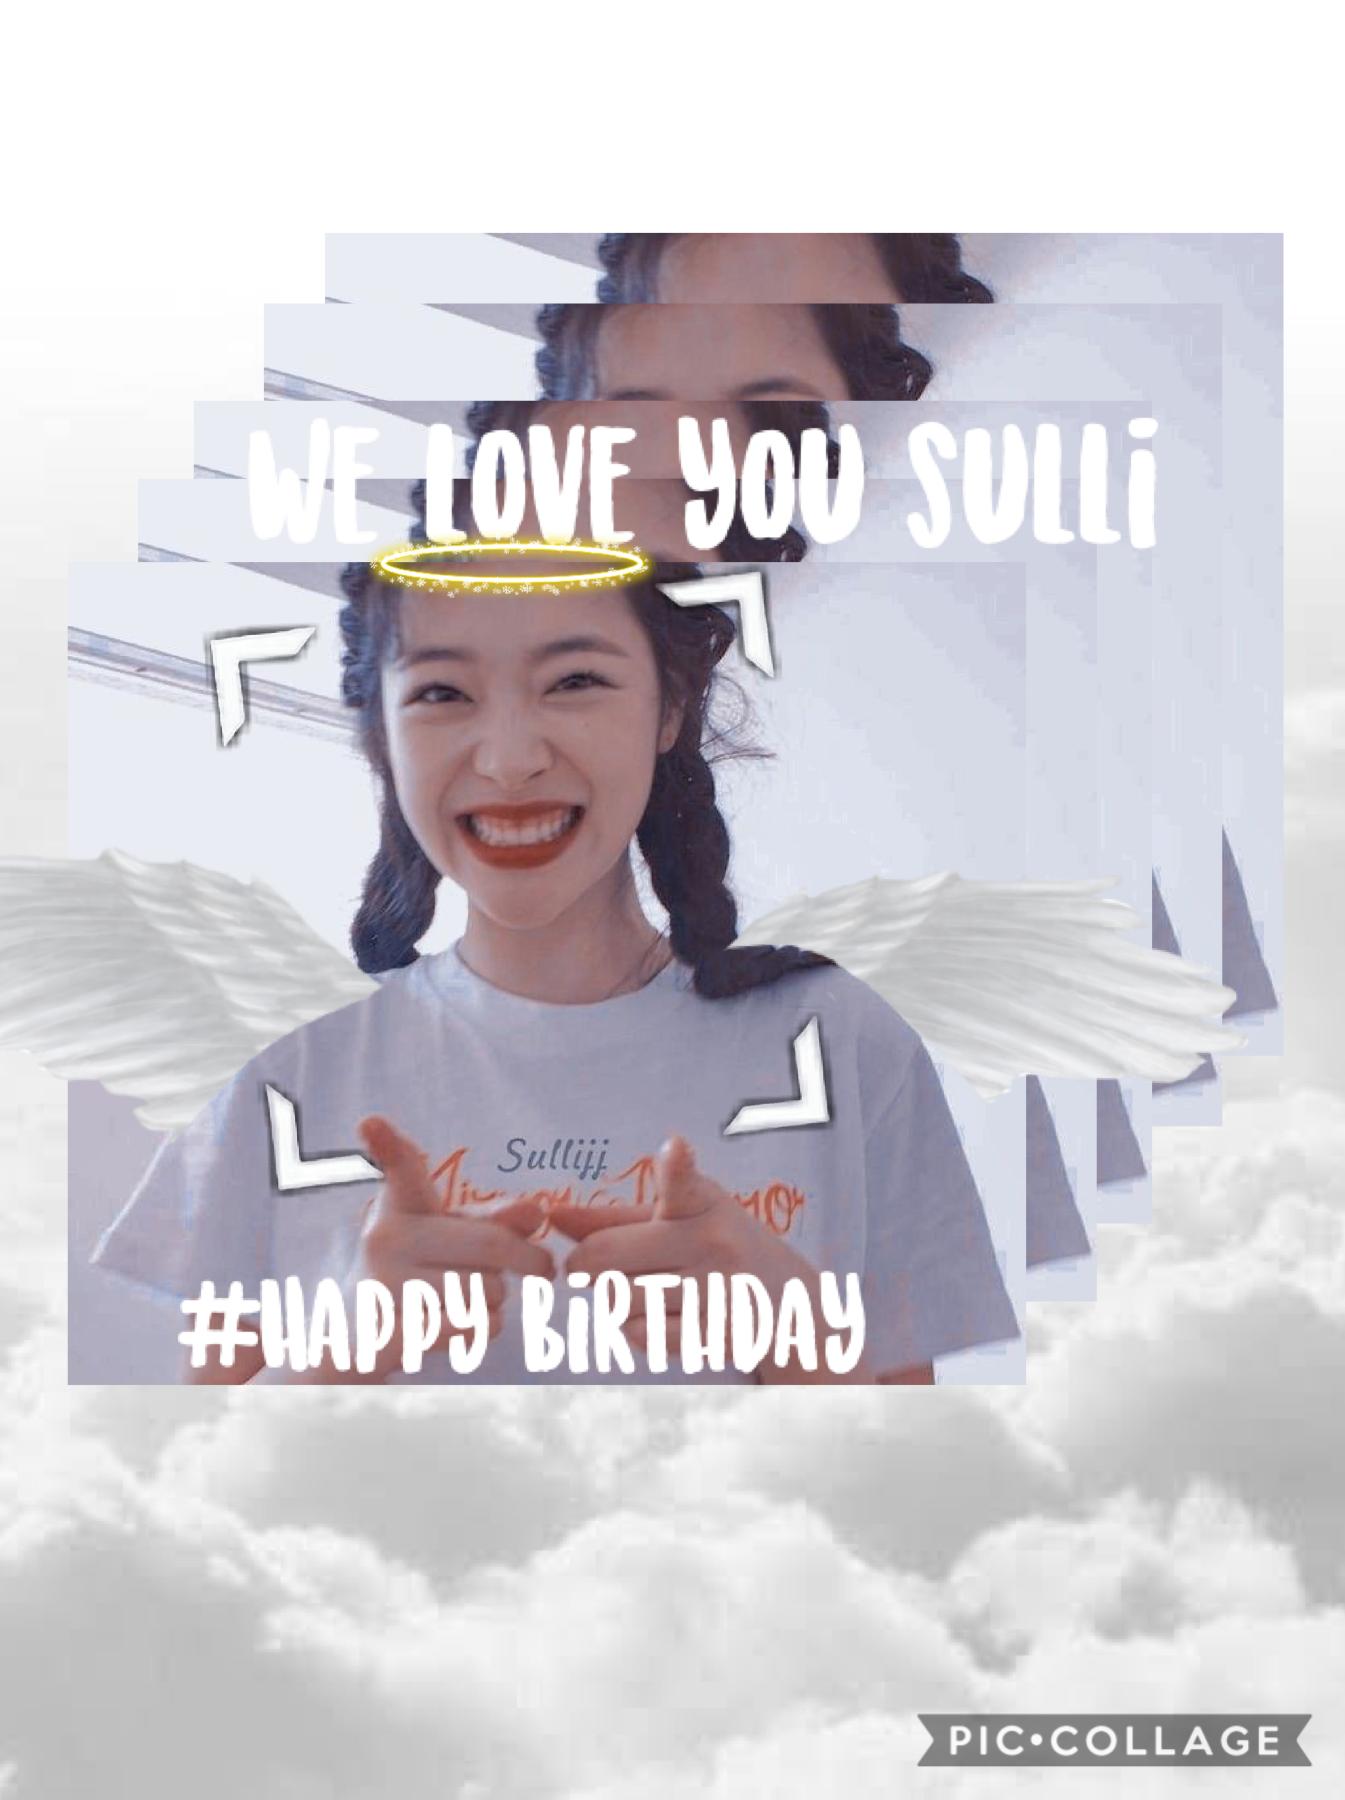 Happy Birthday Sulli! We miss you :( You laugh was my favorite thing and I’m sad I won’t be able to see it anymore :( we love you!